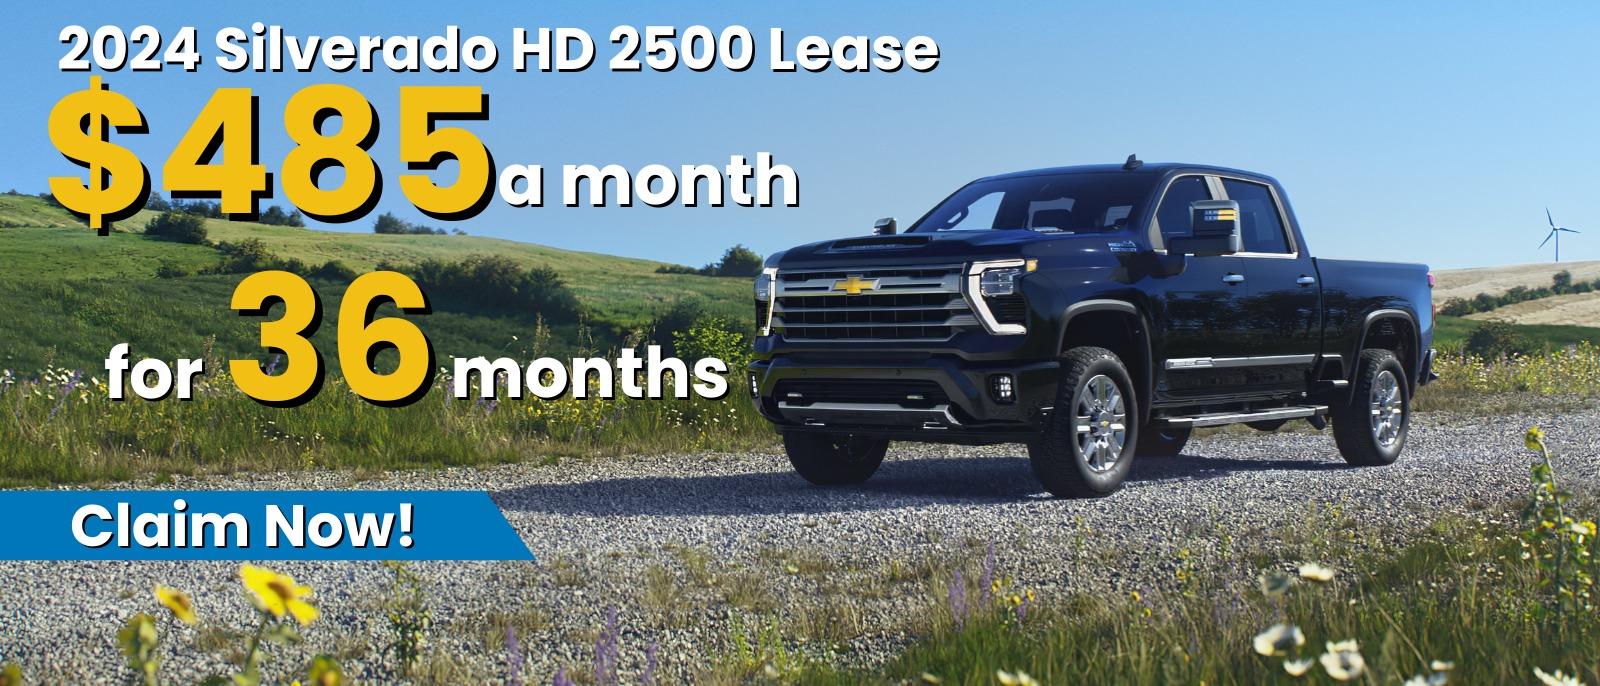 2024 Silverado HD 2500 Lease 
$485 a month for 36 months